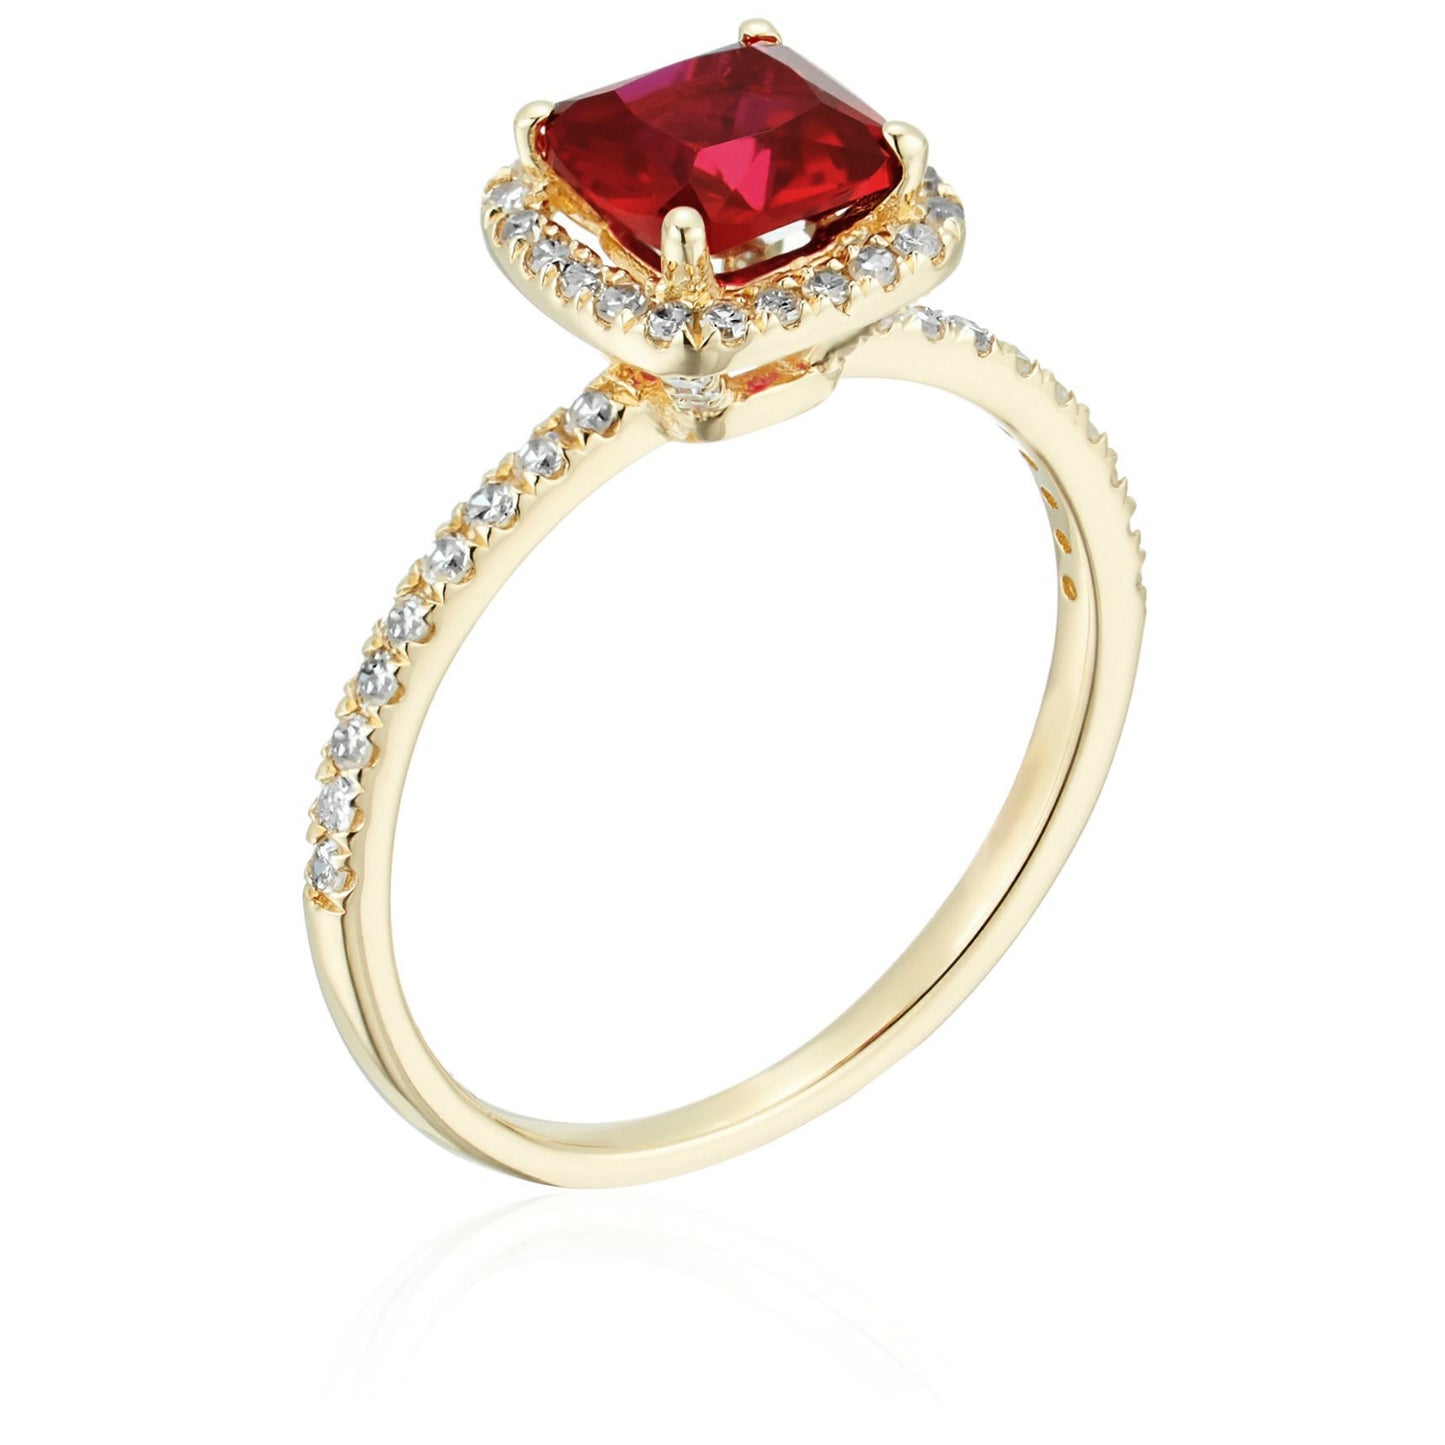 10k Yellow Gold Red Garnet and Diamond Cushion Halo Engagement Ring (1/4cttw, H-I Color, I1-I2 Clarity), - pinctore